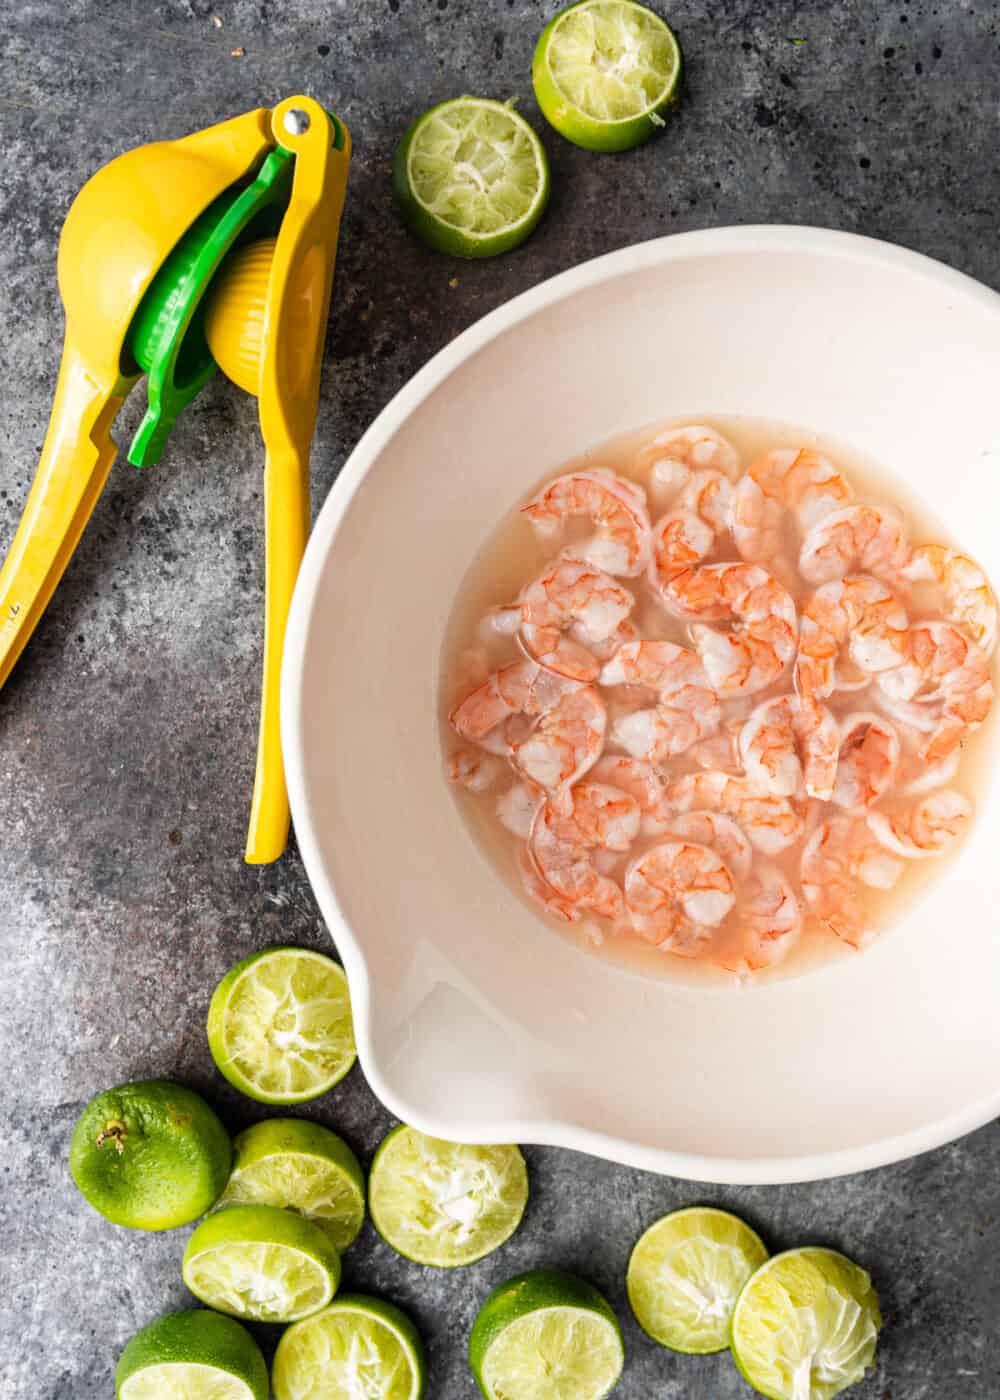 raw shrimp in lime juice At 30 minutes total